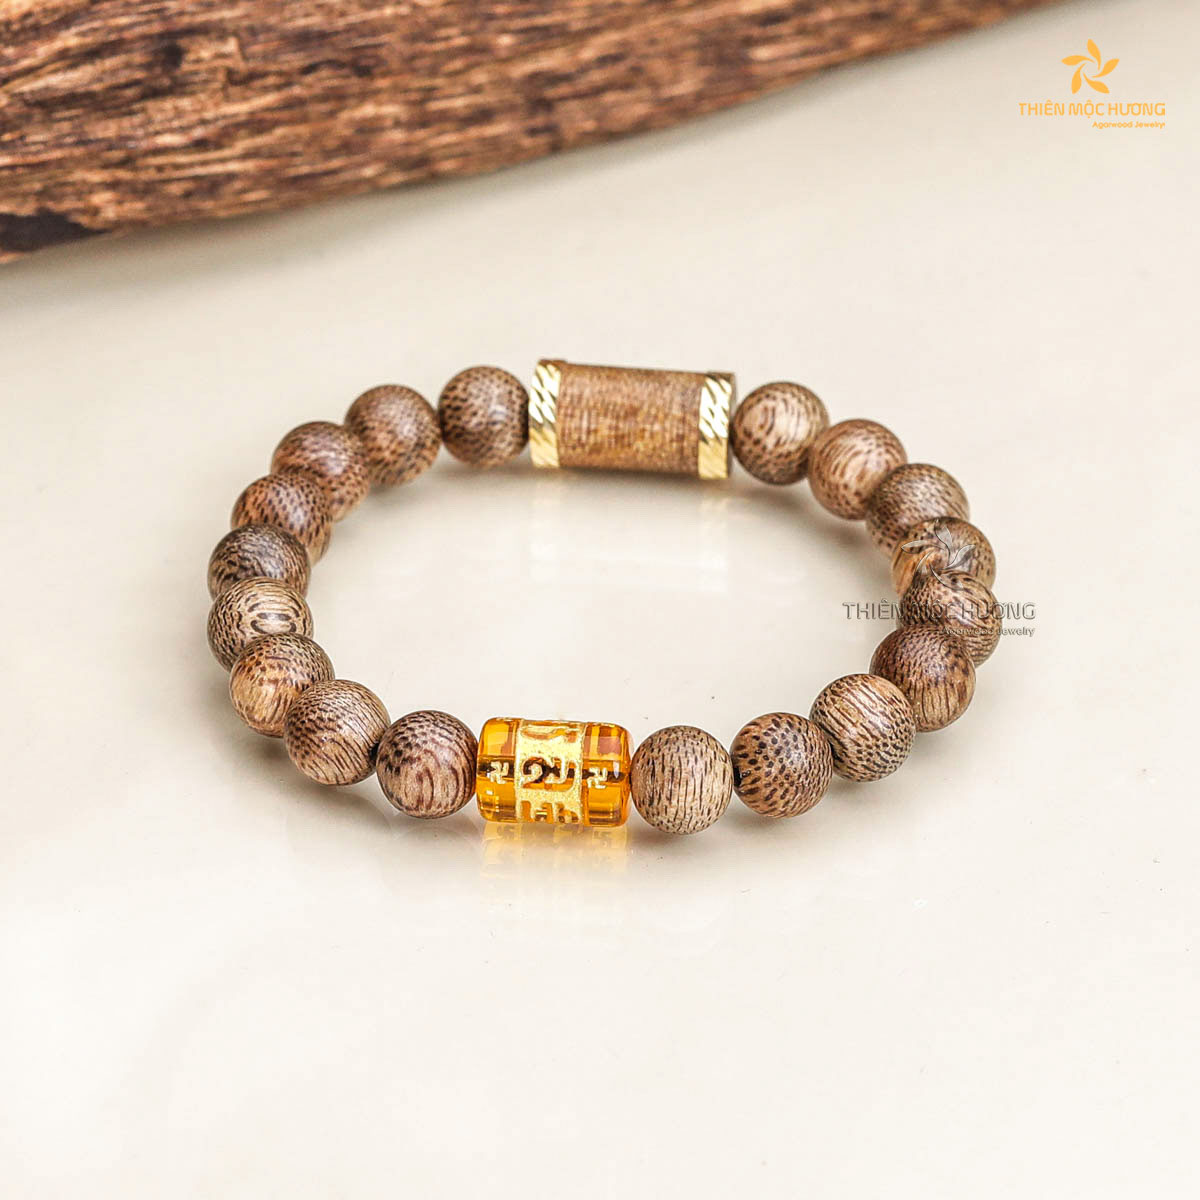 Tibetan Amulet Agarwood Bracelet opens the mind of compassion, and charity, bringing many blessings to recipients